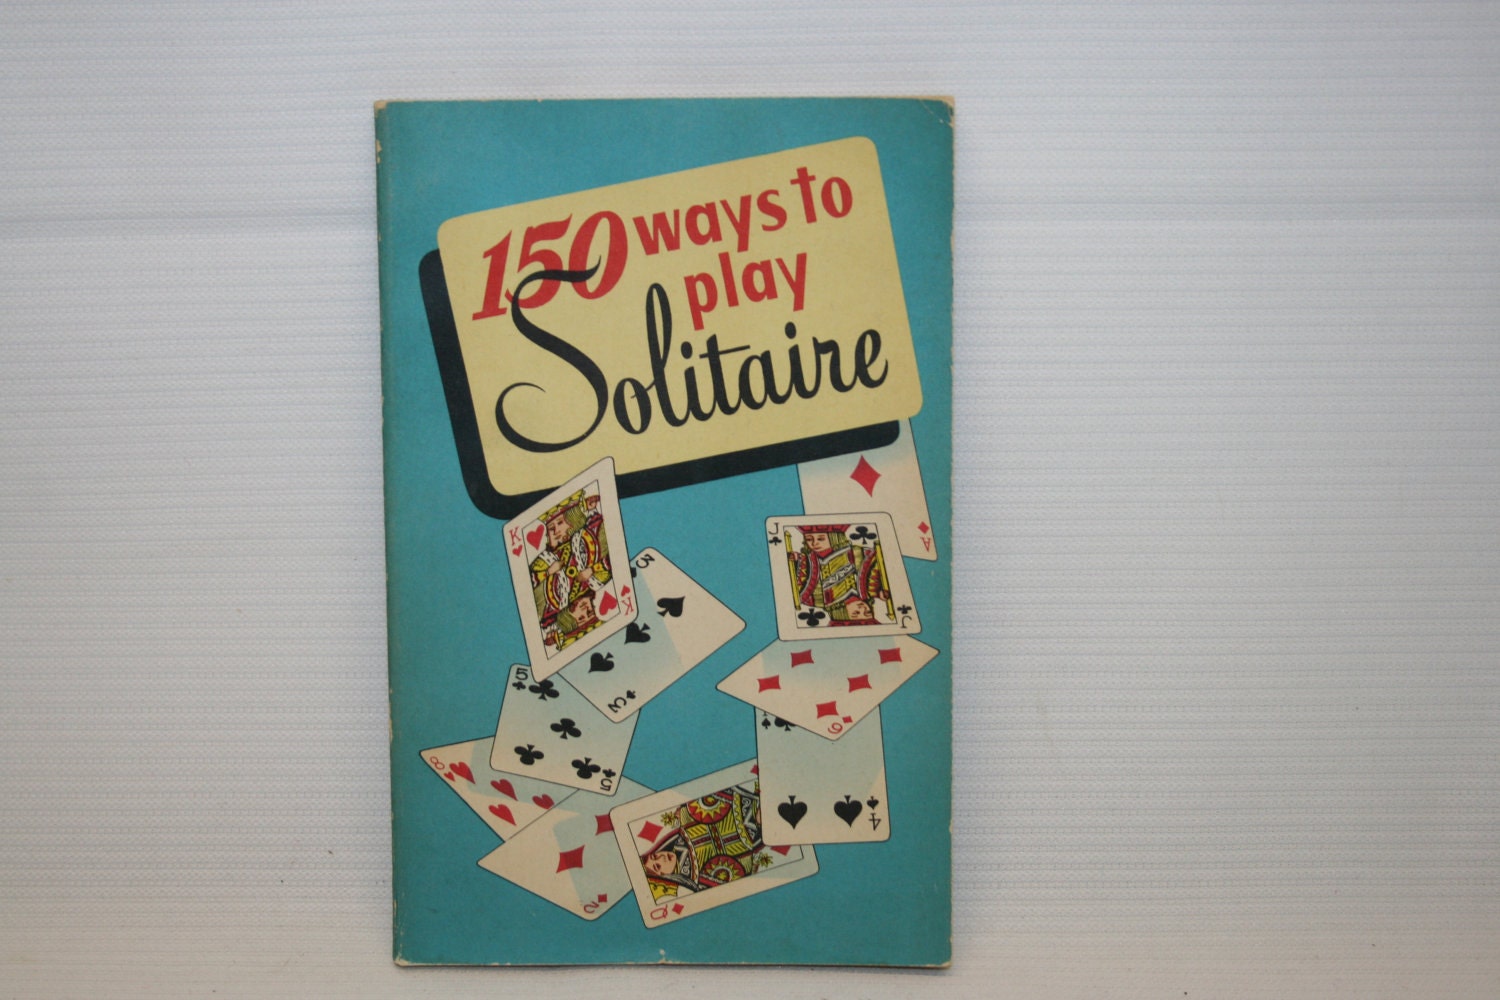 Play Solitaire Card Game